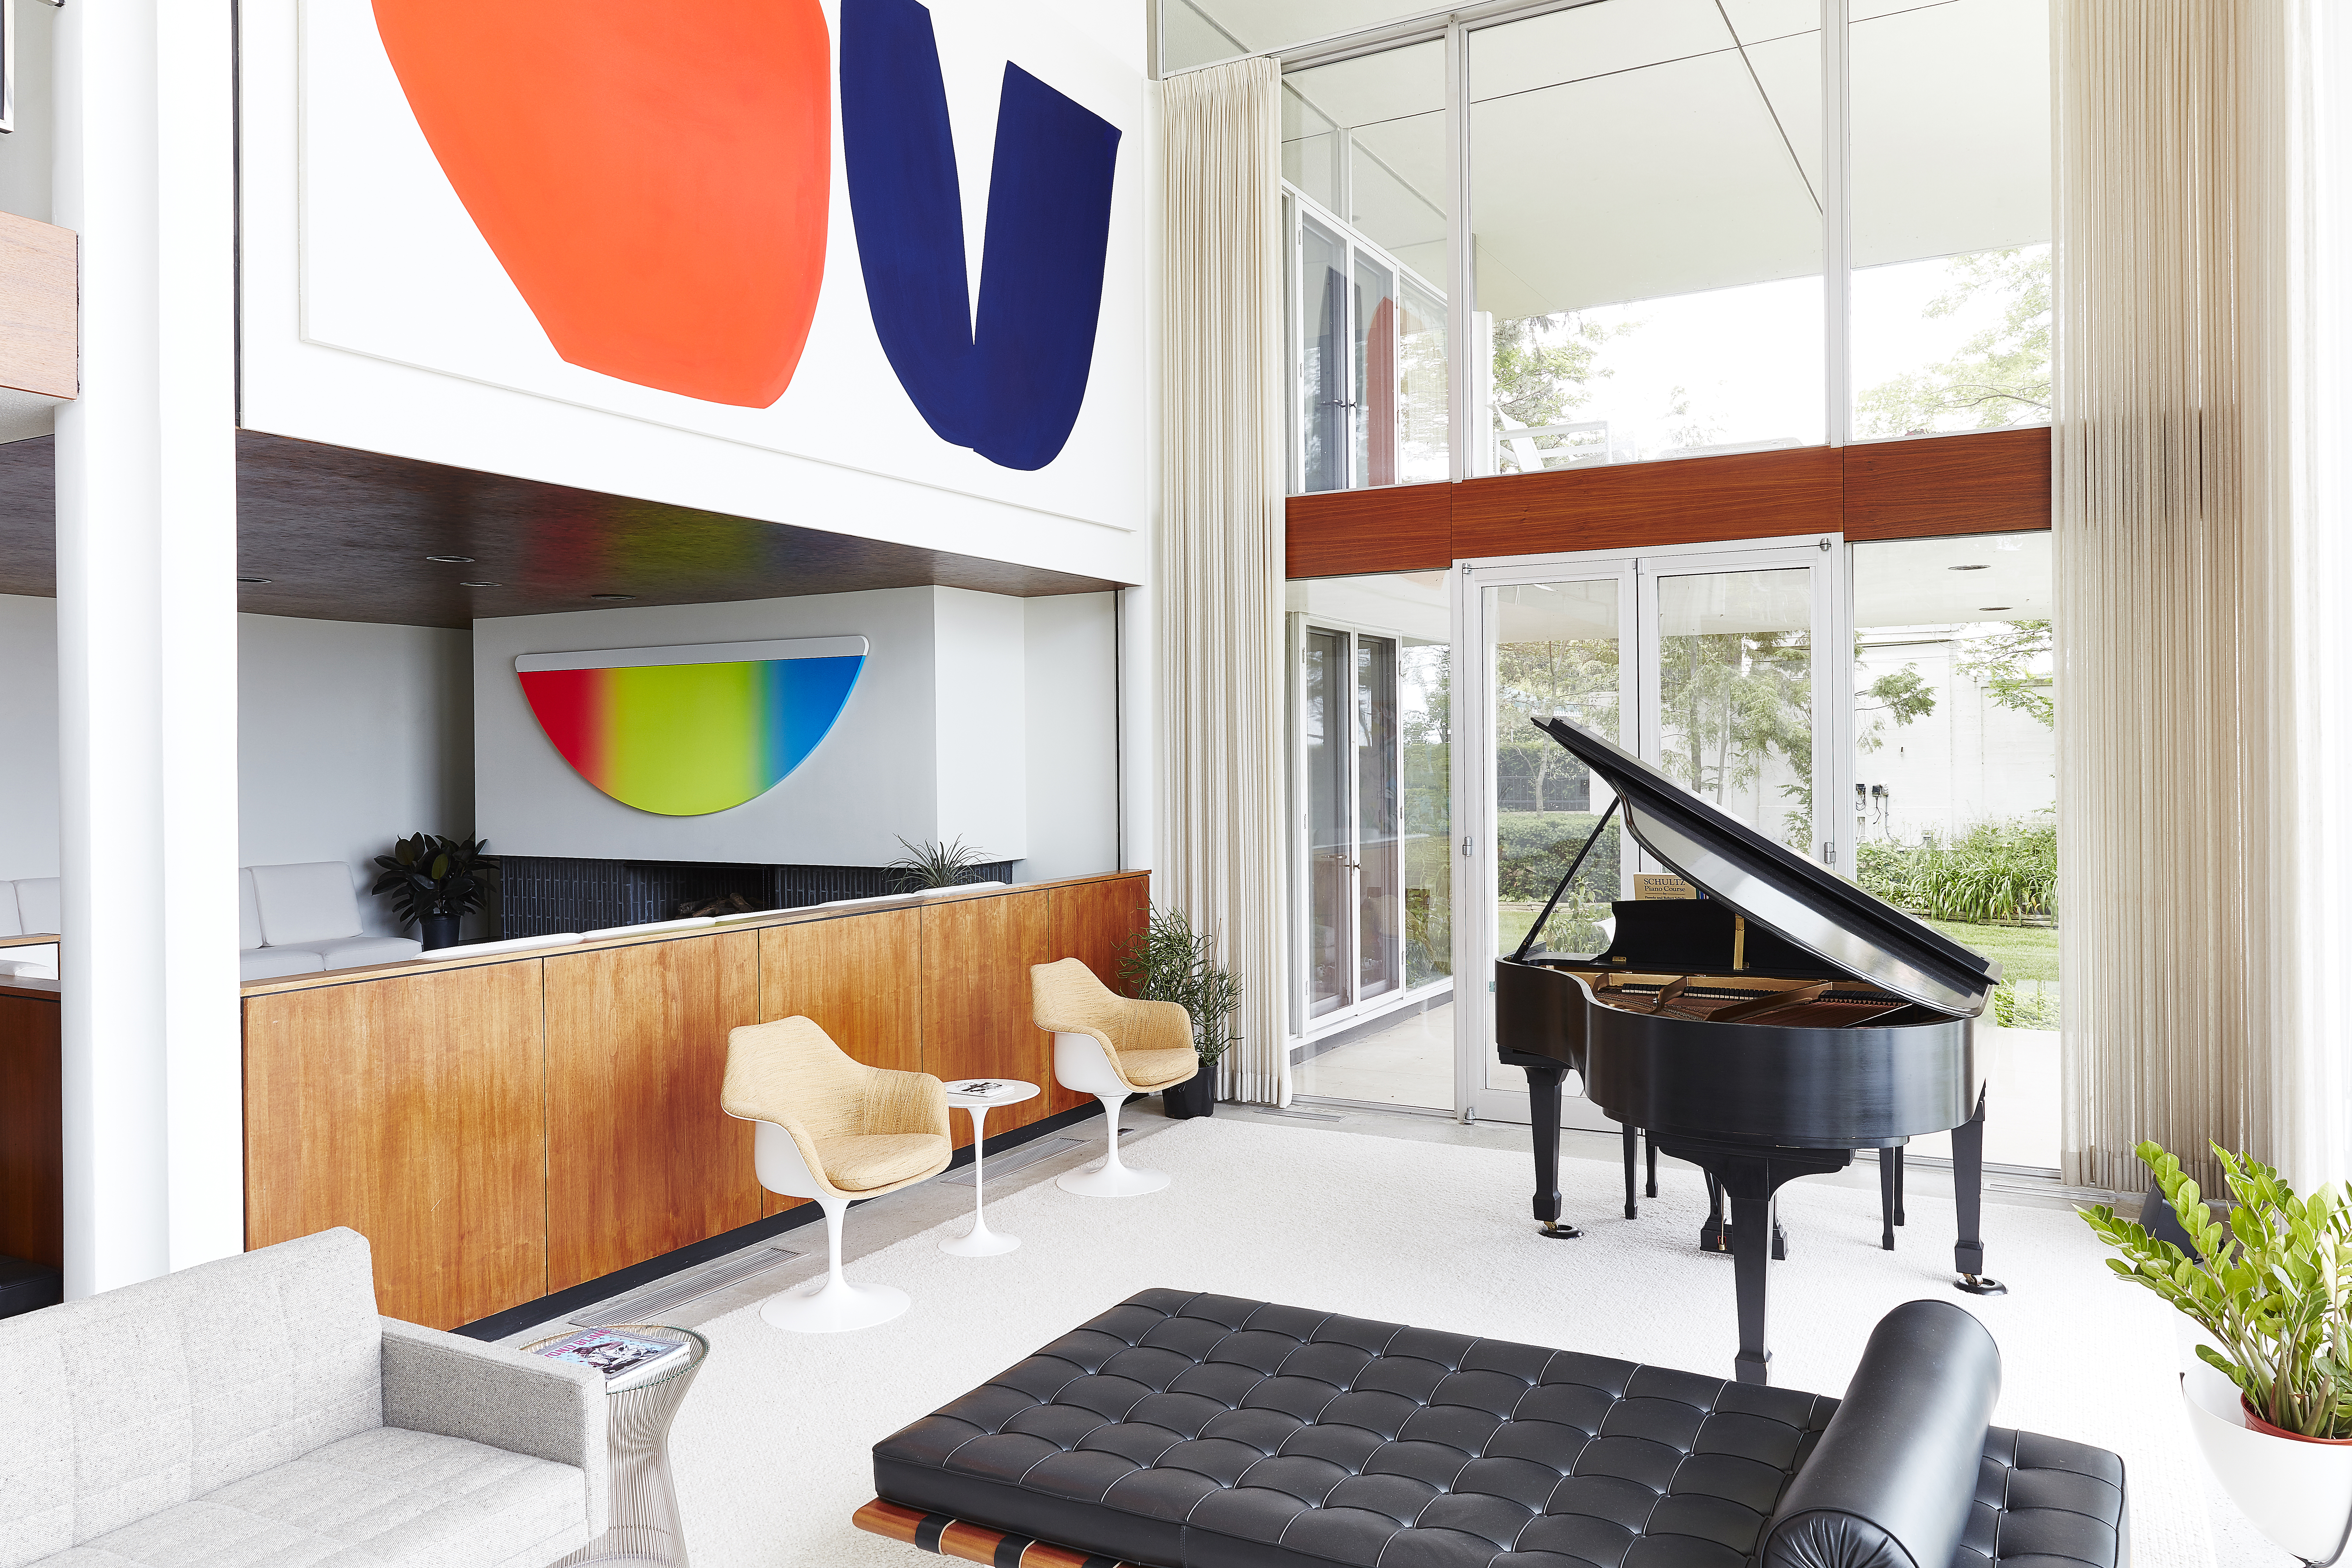 Inside the Curis's home. Works by Greg Bogin and Paul Kremer. Photo: Peter Lustyk. Courtes